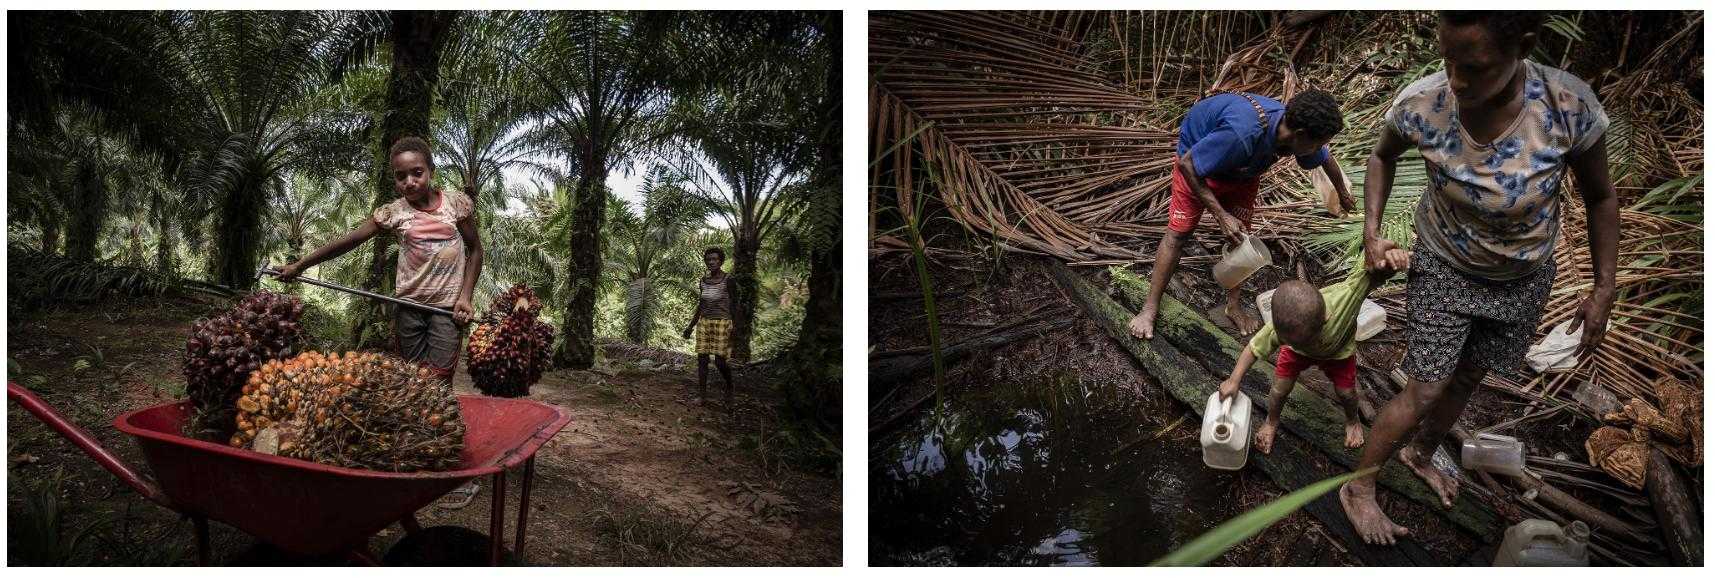 Left: Samela, 10 years old, never attended school and works in an oil palm plantation with her grandmother in Boven Digoel. Right: Women and children fetch water for drinking and cooking in the sago groves.